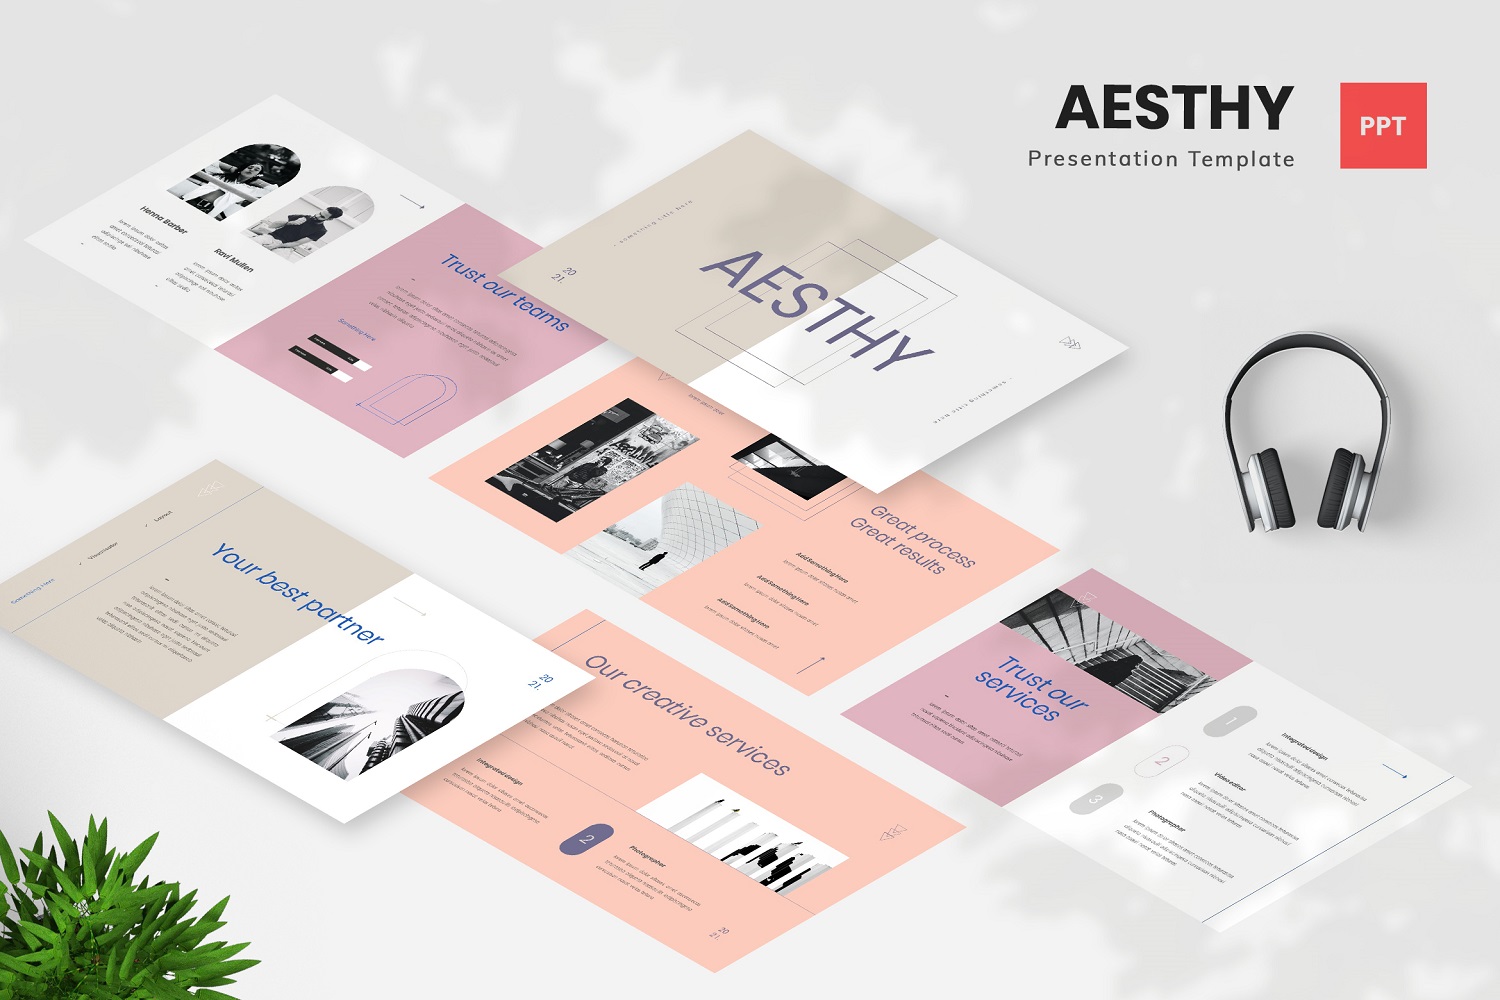 Aesthy - Aesthetic Powerpoint Template